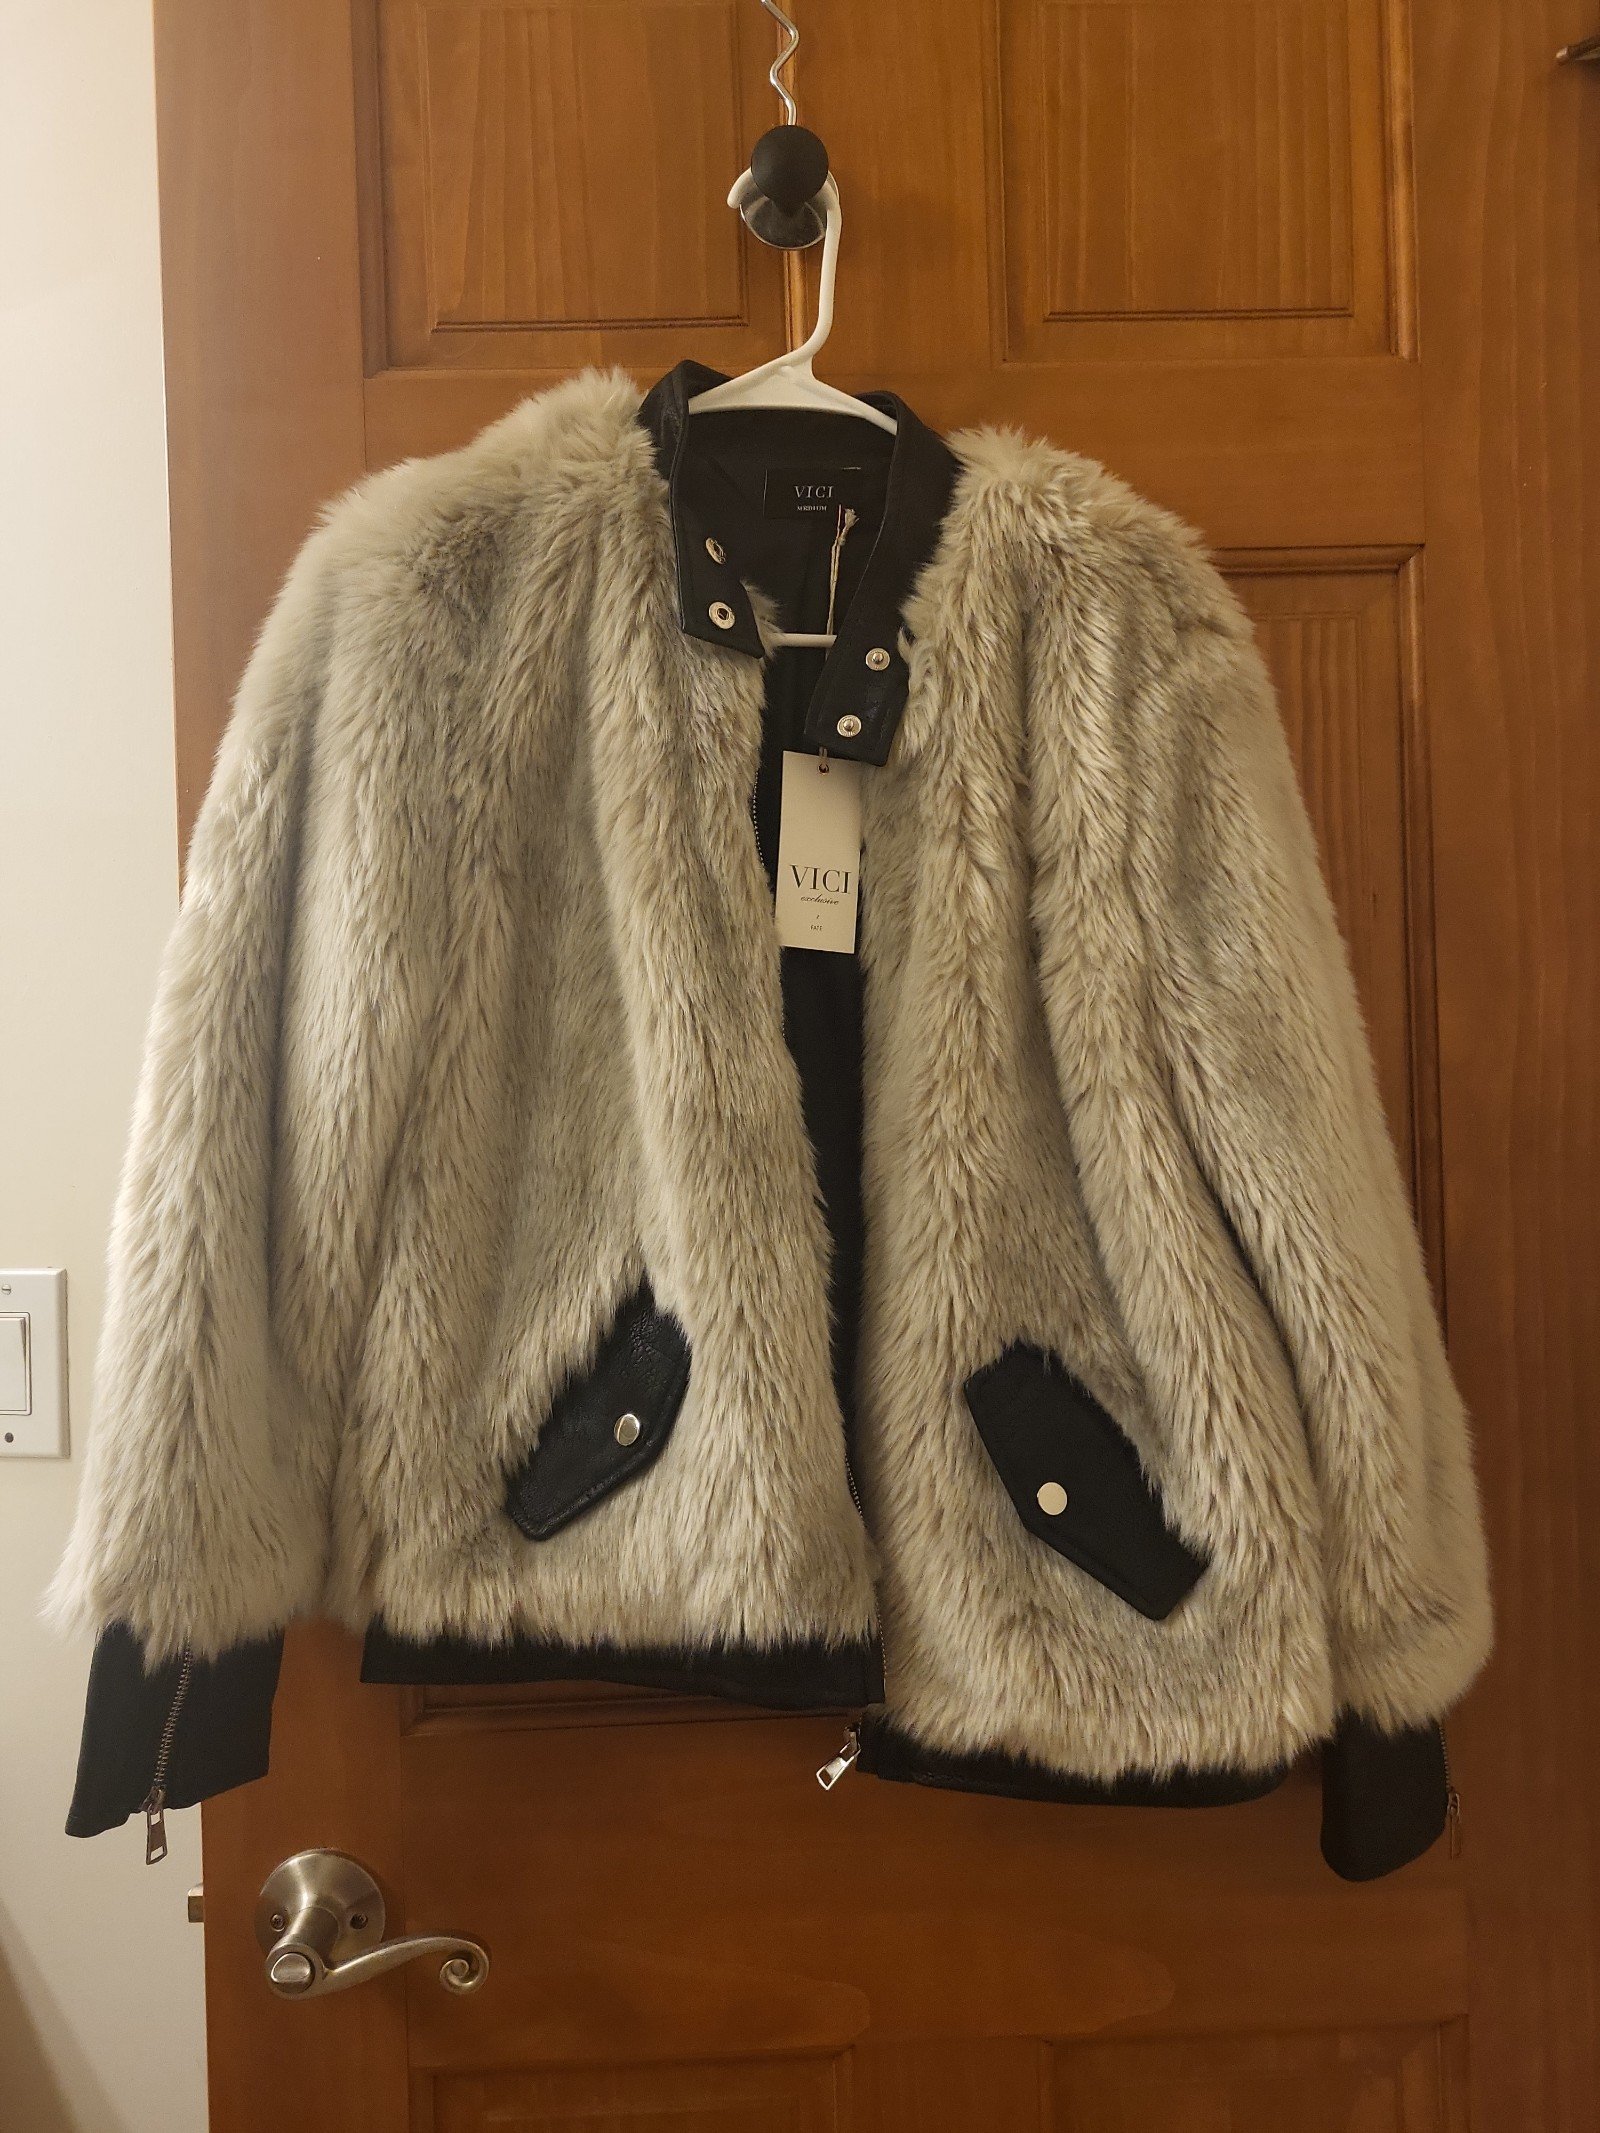 big discount VICI Vanity Faux Fur Leather Trim Pocketed